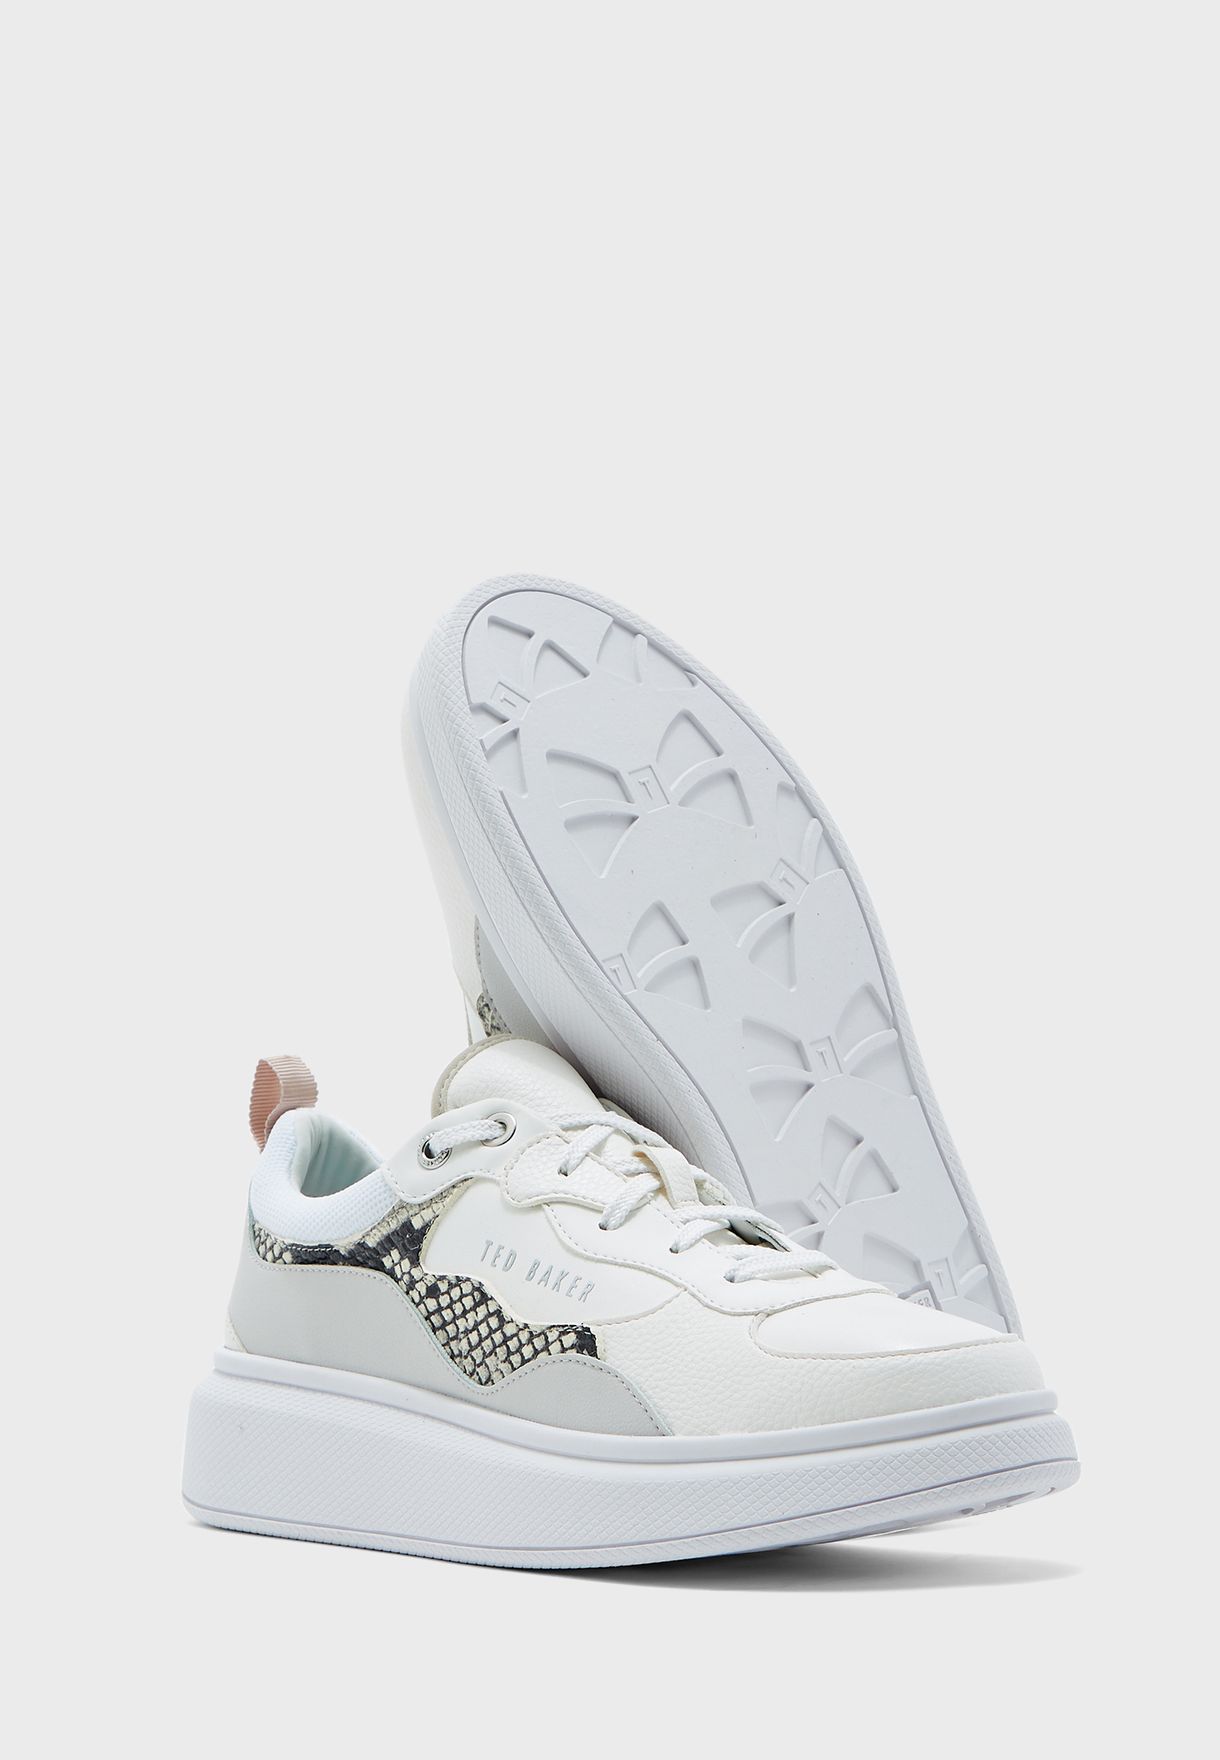 ted baker white sneakers